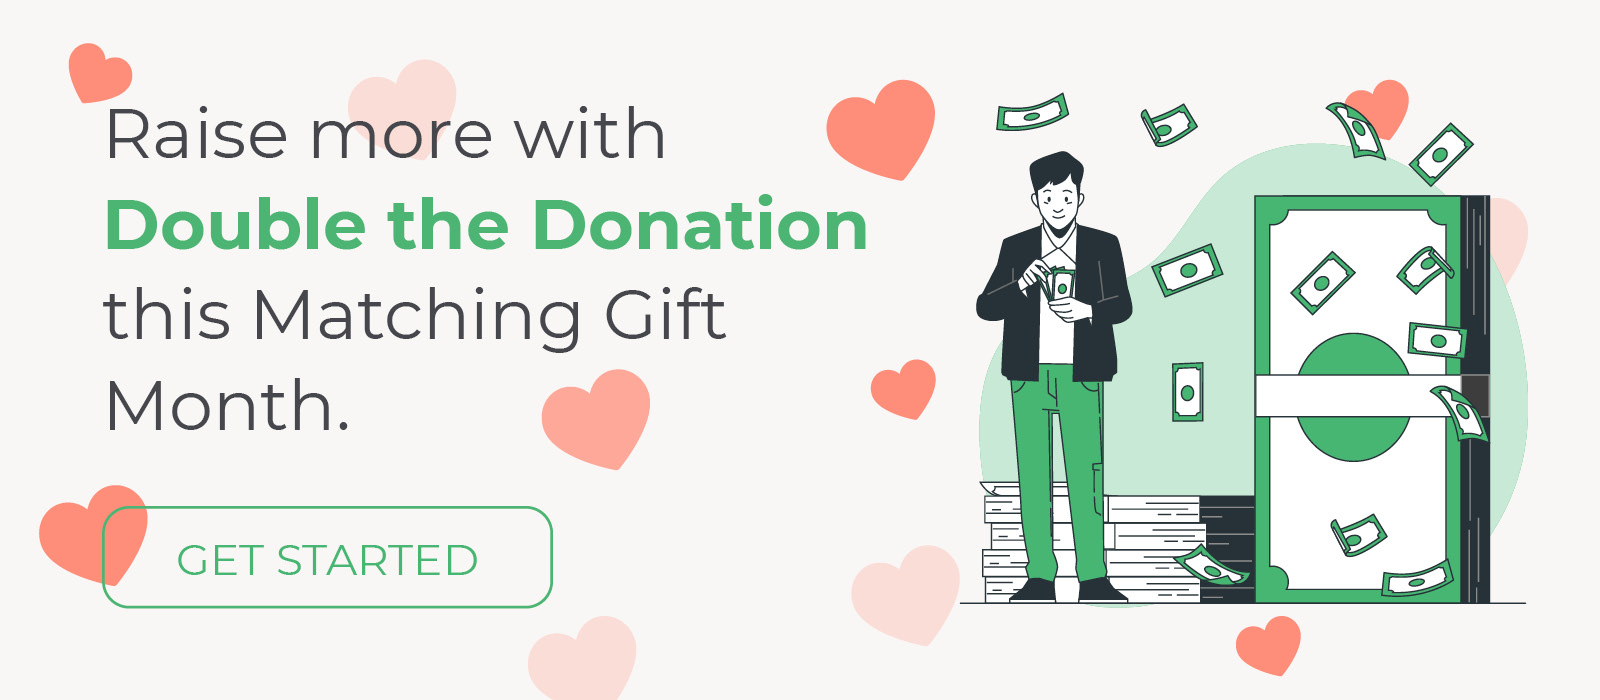 Get started with Double the Donation this month